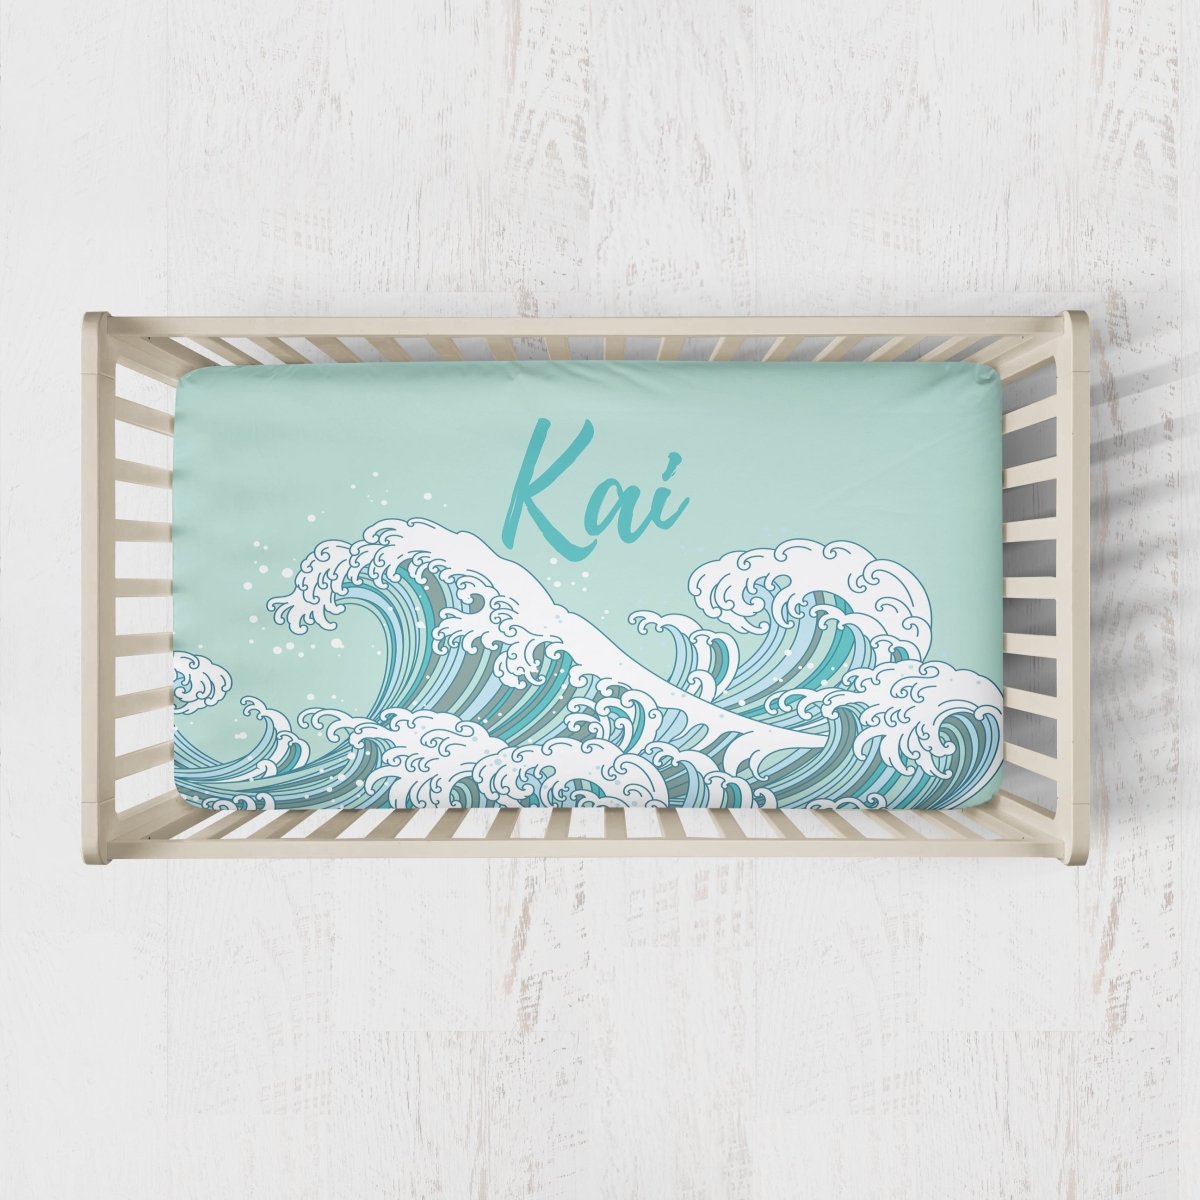 Ocean Waves Personalized Crib Sheet - gender_boy, gender_neutral, Personalized_Yes